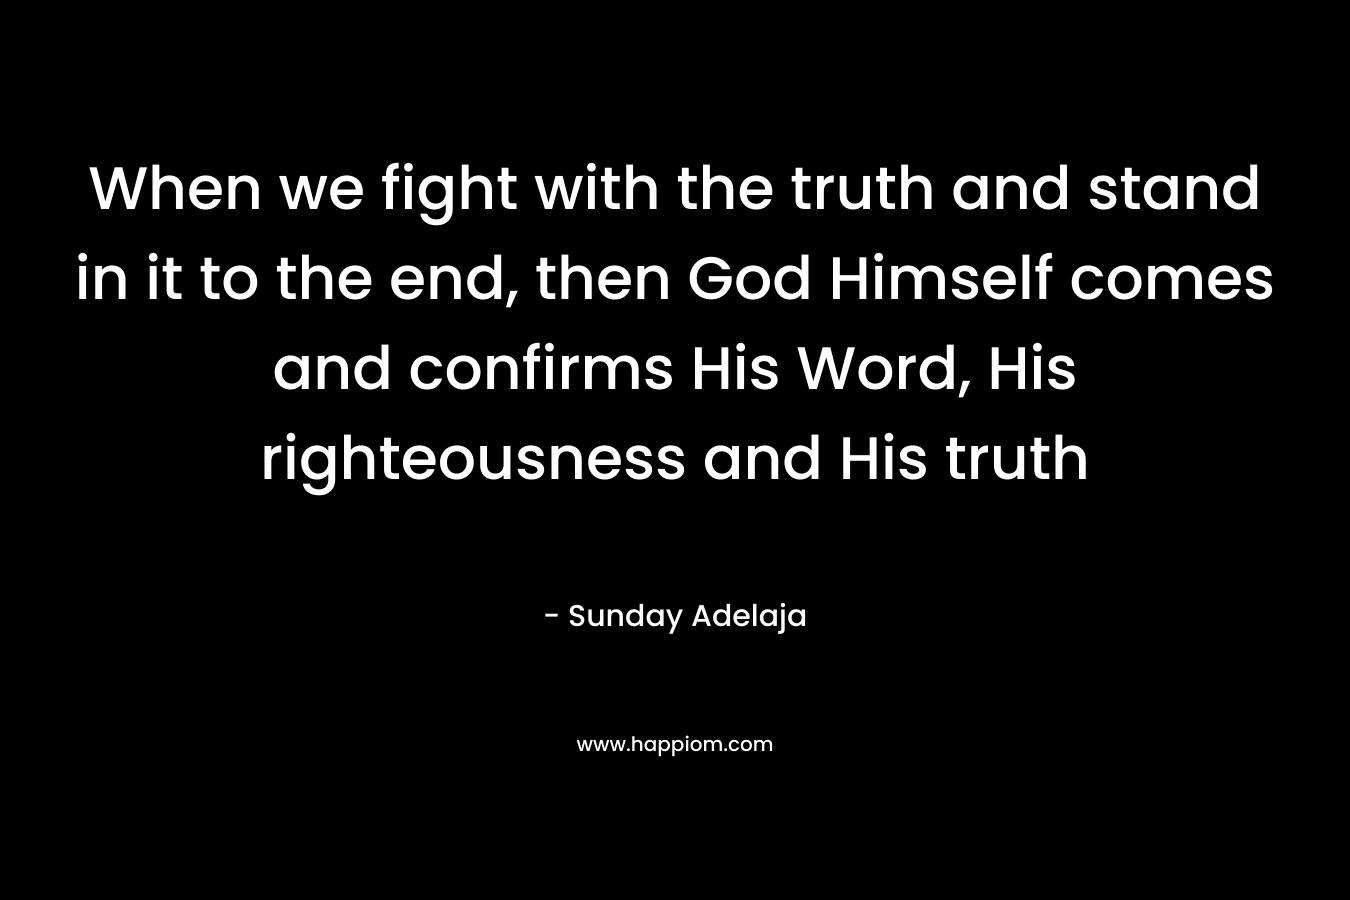 When we fight with the truth and stand in it to the end, then God Himself comes and confirms His Word, His righteousness and His truth